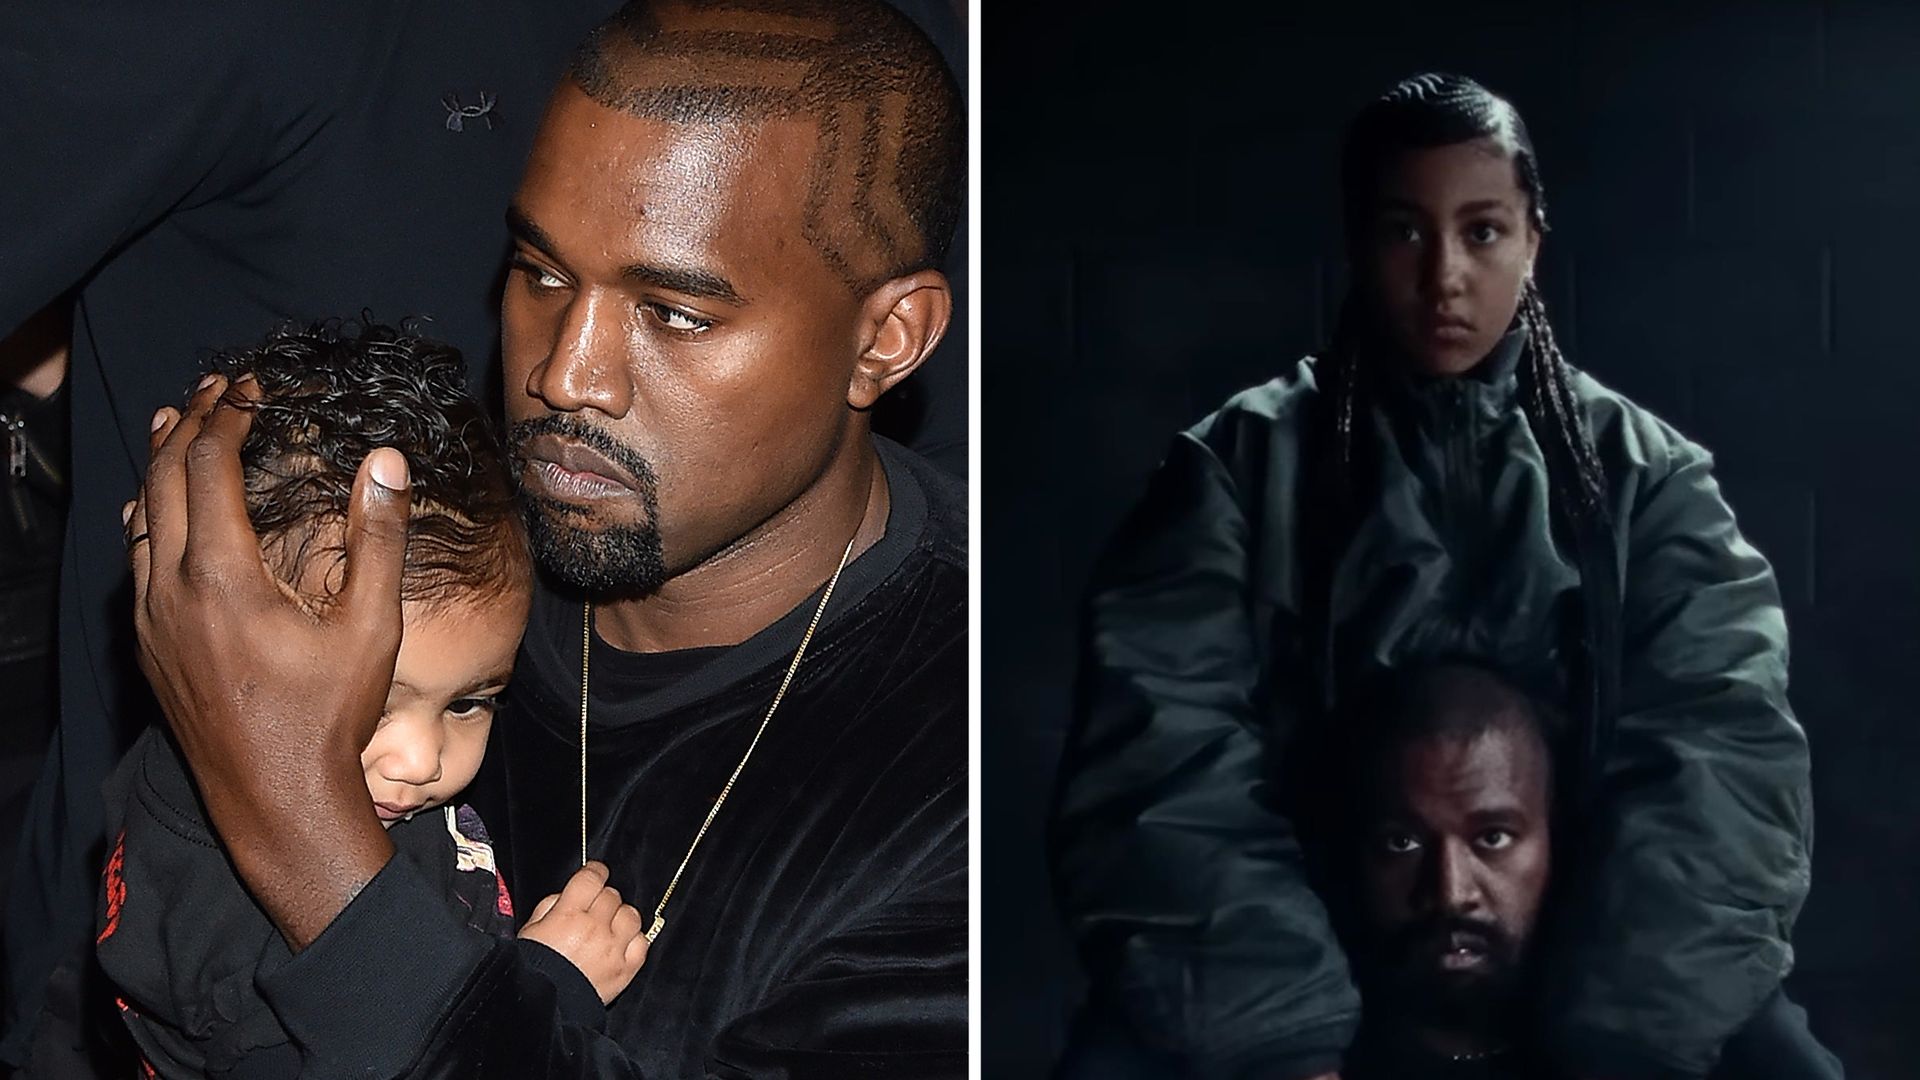 Inside Kanye West's close bond with oldest daughter North — who is following in his footsteps